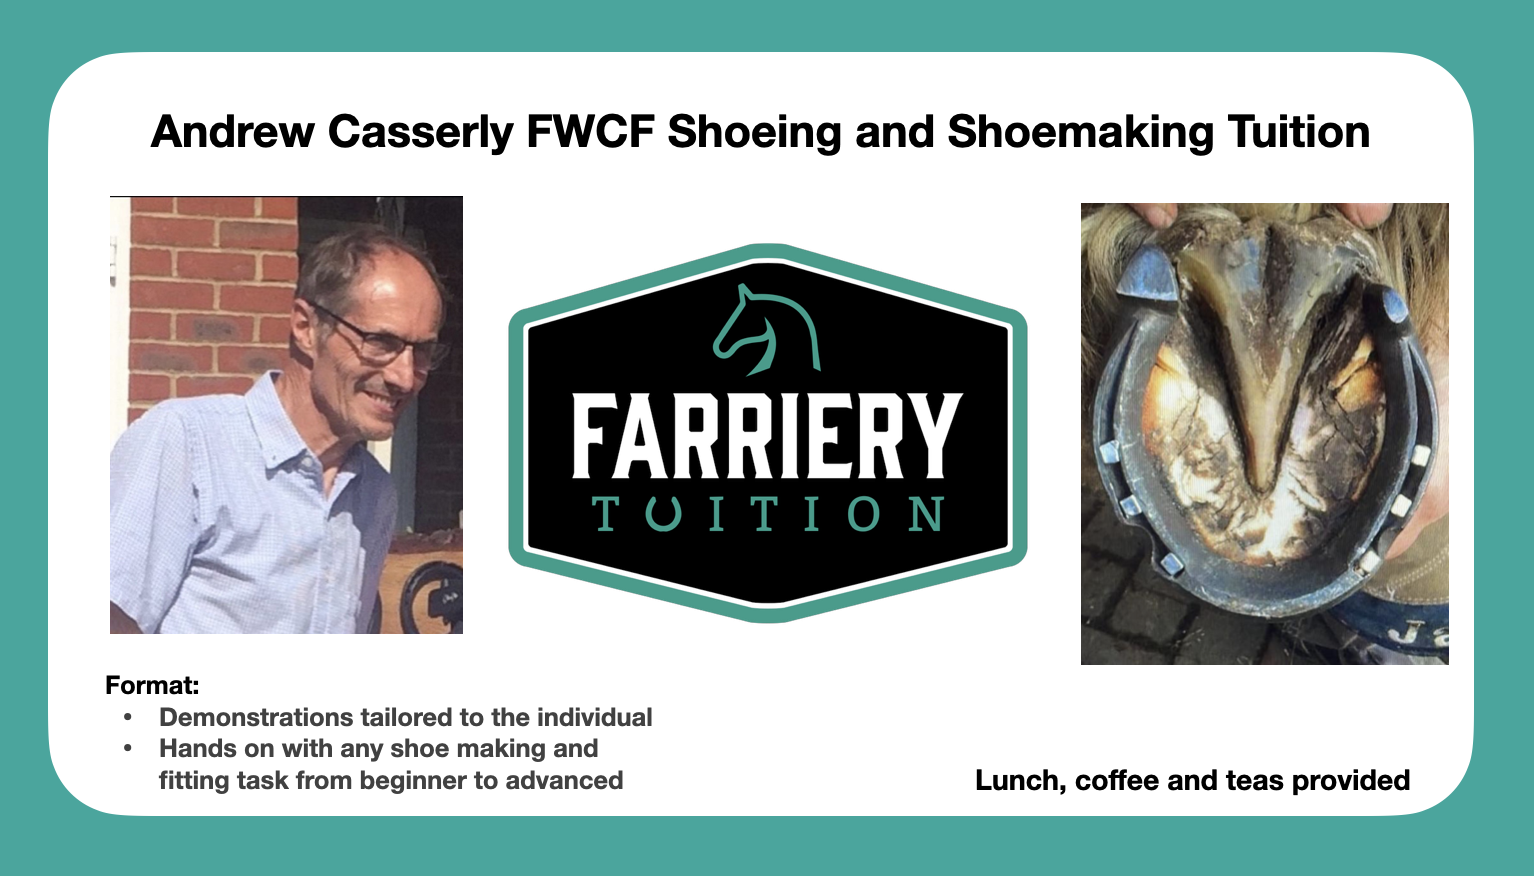 Andrew Casserly FWCF-Shoemaking and Shoeing Day